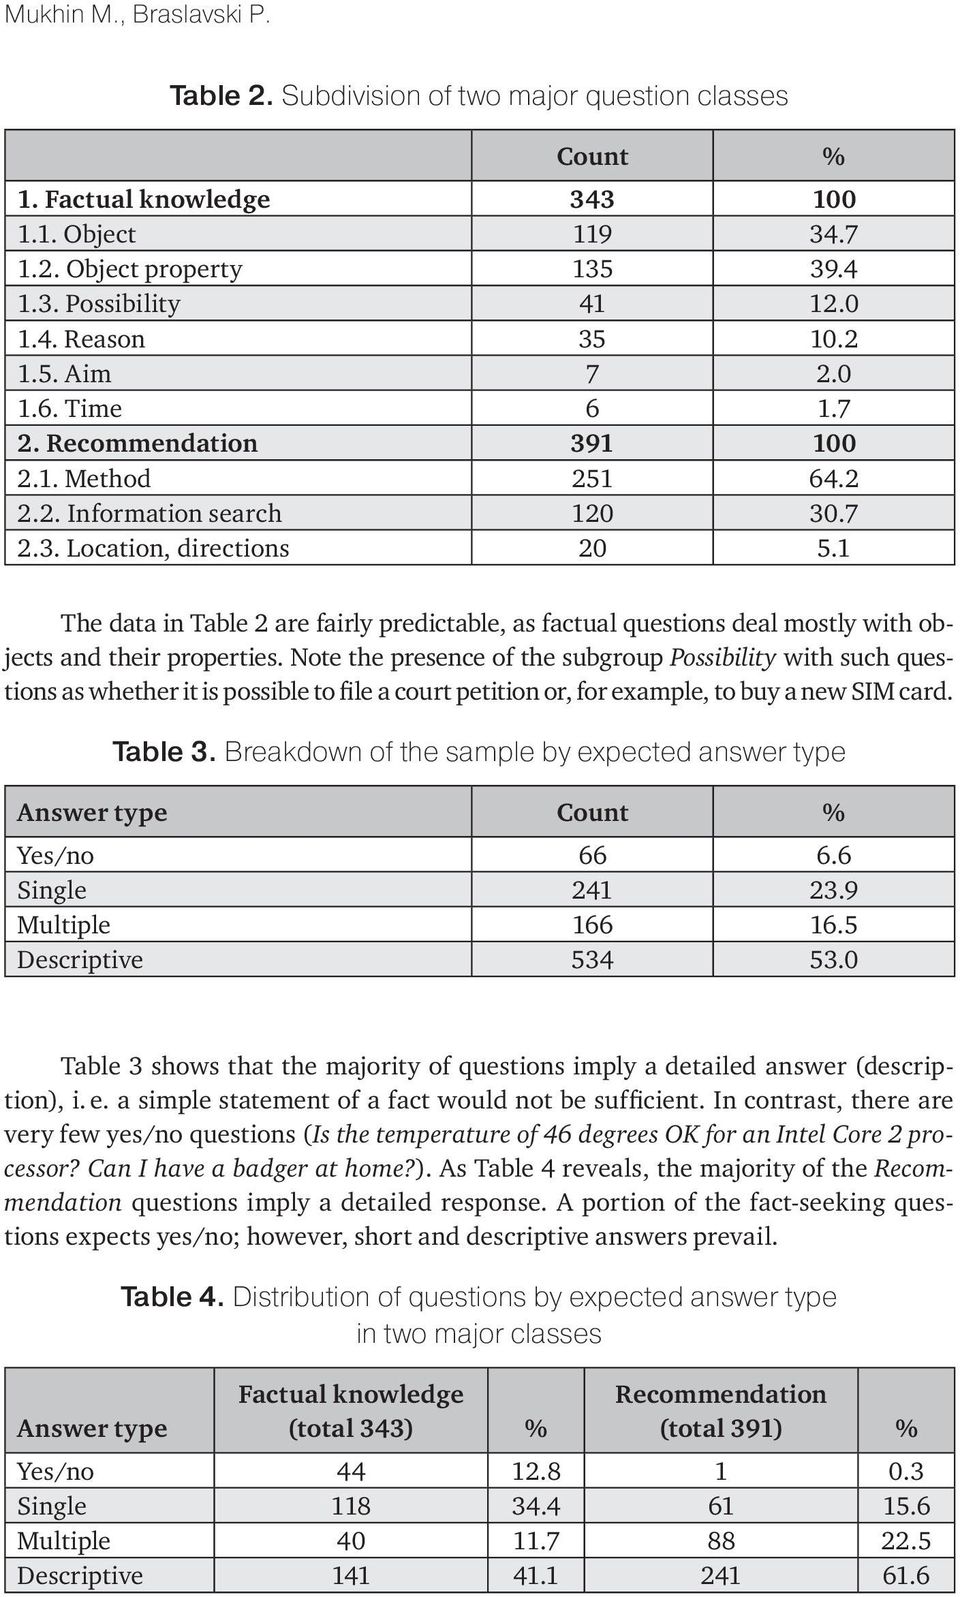 1 The data in Table 2 are fairly predictable, as factual questions deal mostly with objects and their properties.